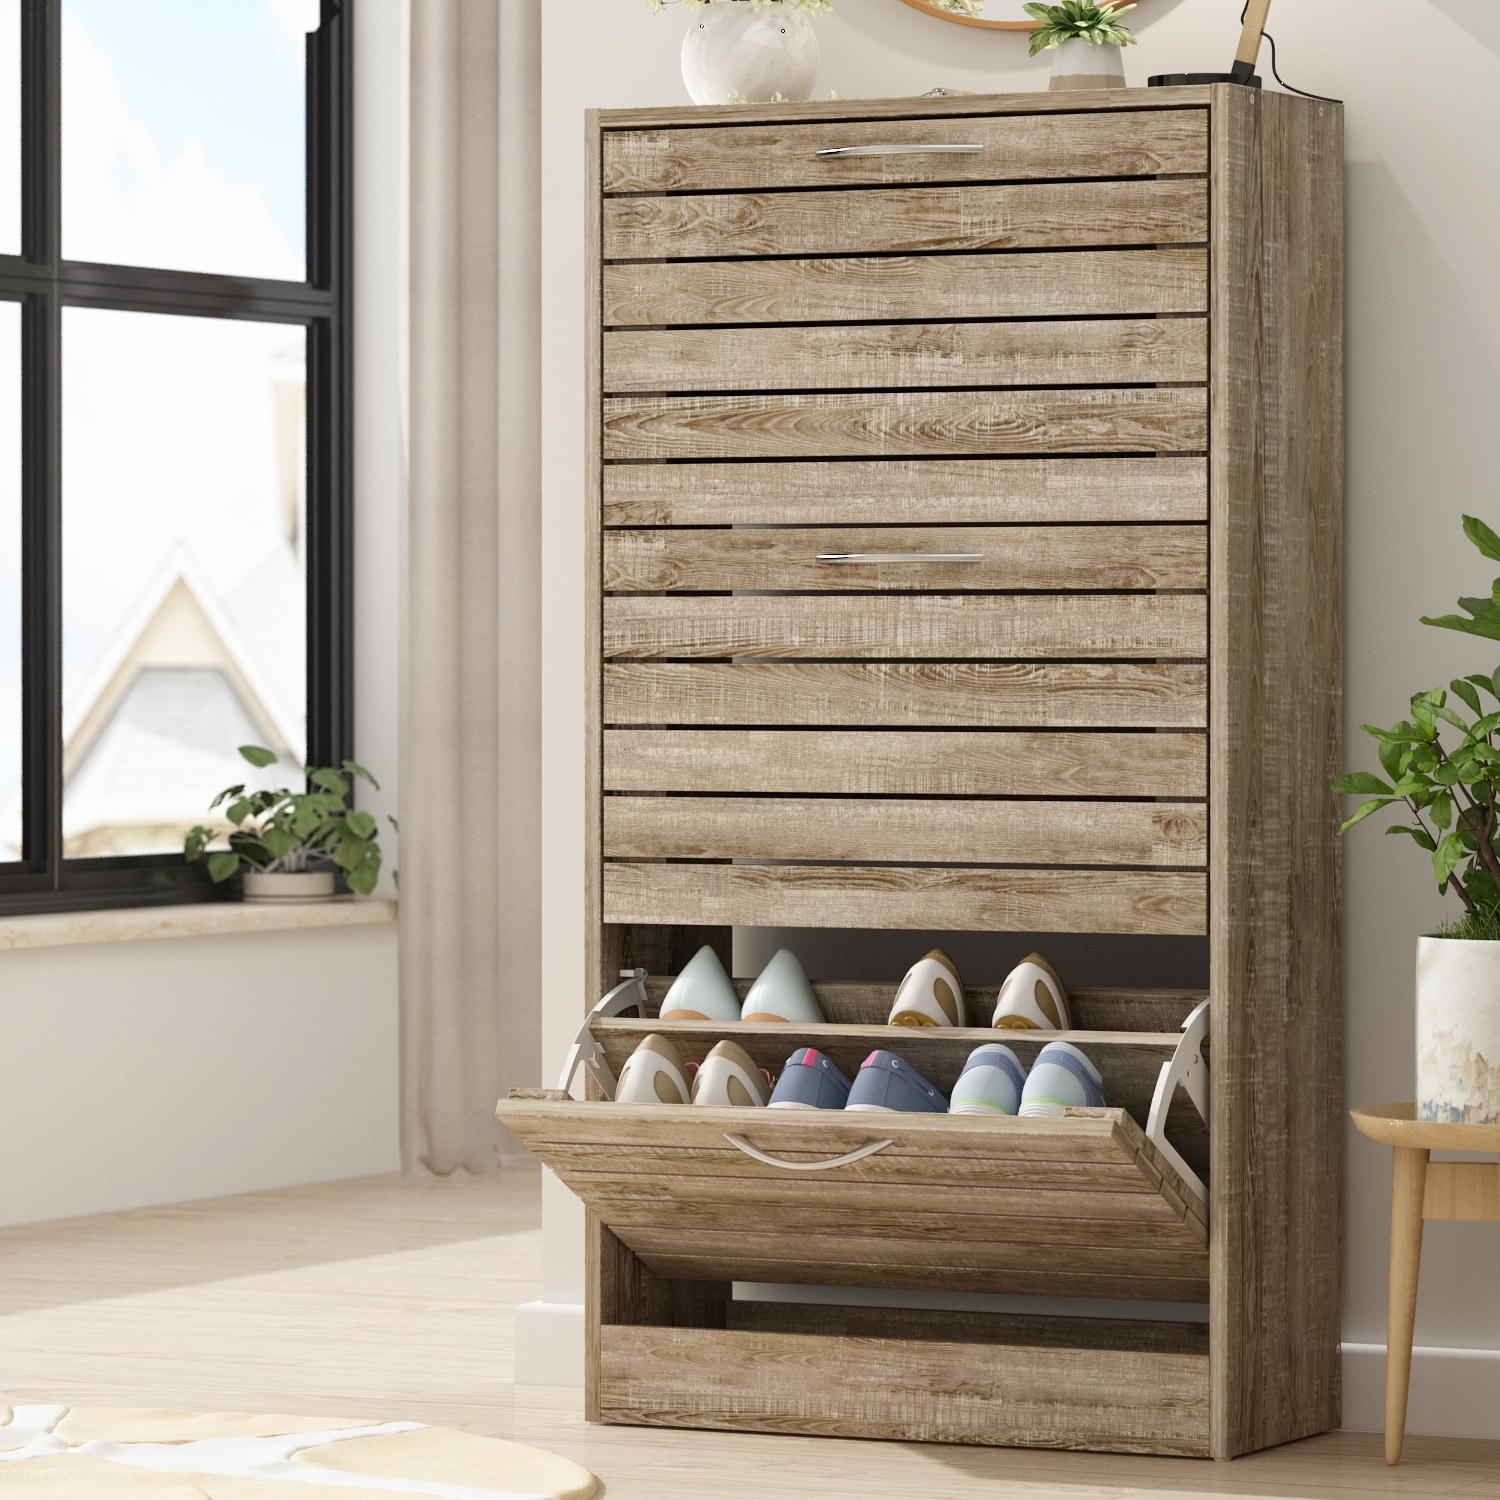 https://ak1.ostkcdn.com/images/products/is/images/direct/f80cf7b8f8ed8672baccb7c5544da772caeb62aa/Shoe-Cabinet-with-Flip-Drawer-for-Entryway-Rack-Storage-Organizer.jpg